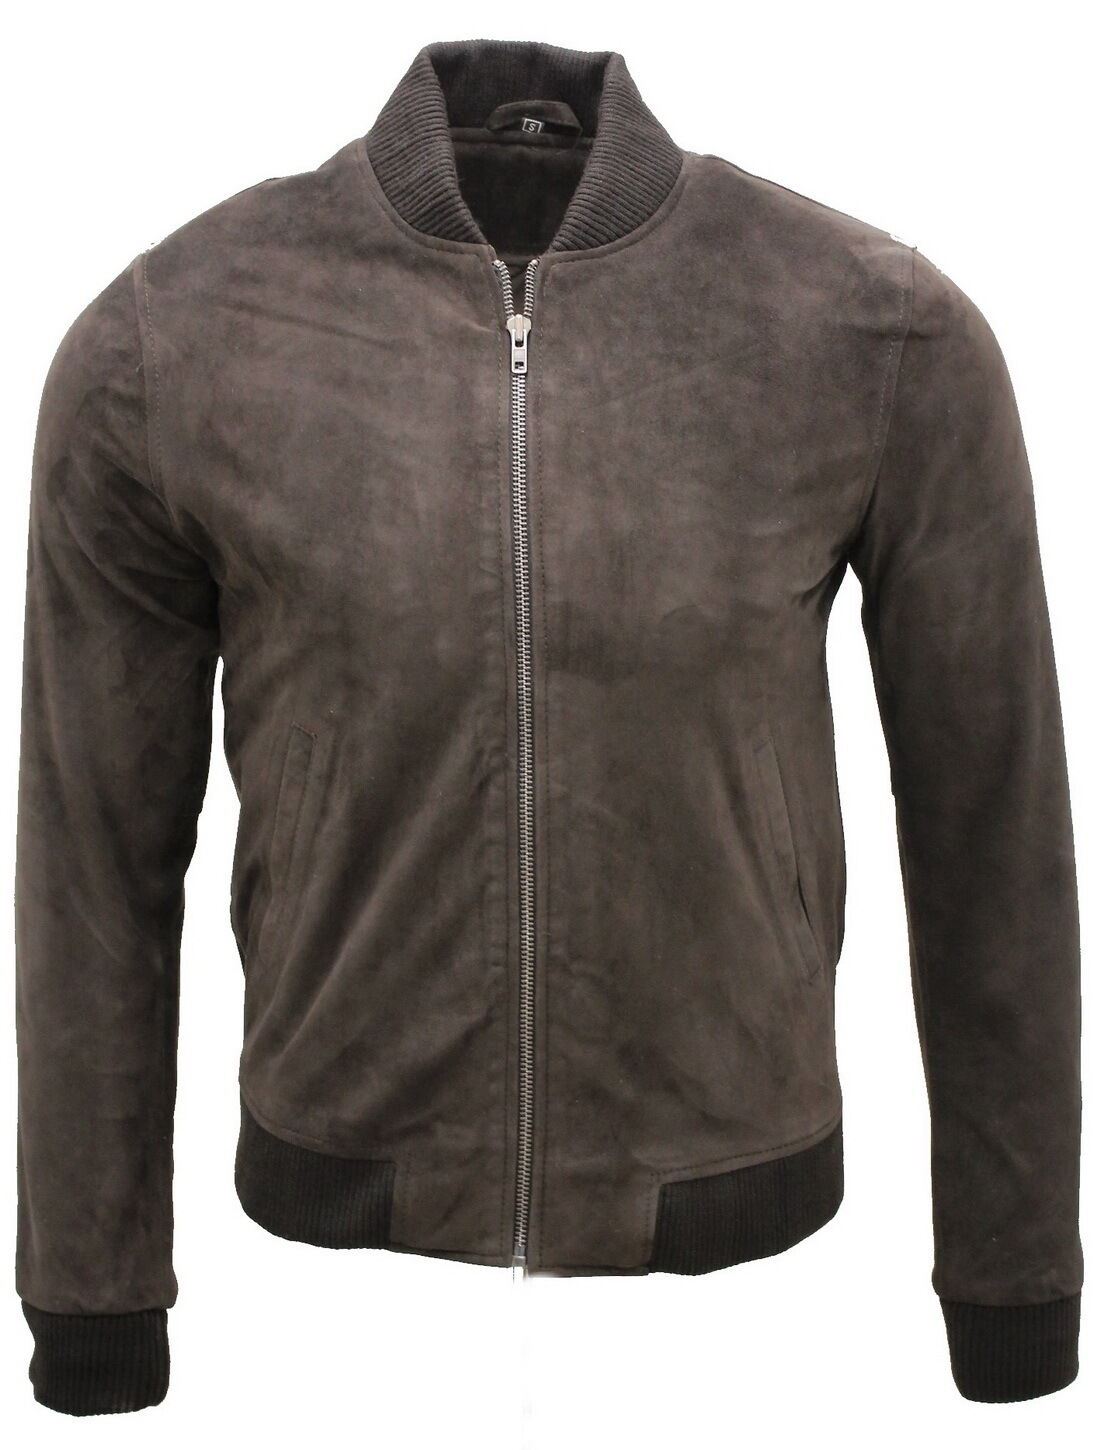 Mens Suede Varsity Leather Bomber Jacket-Castleford - Upperclass Fashions 